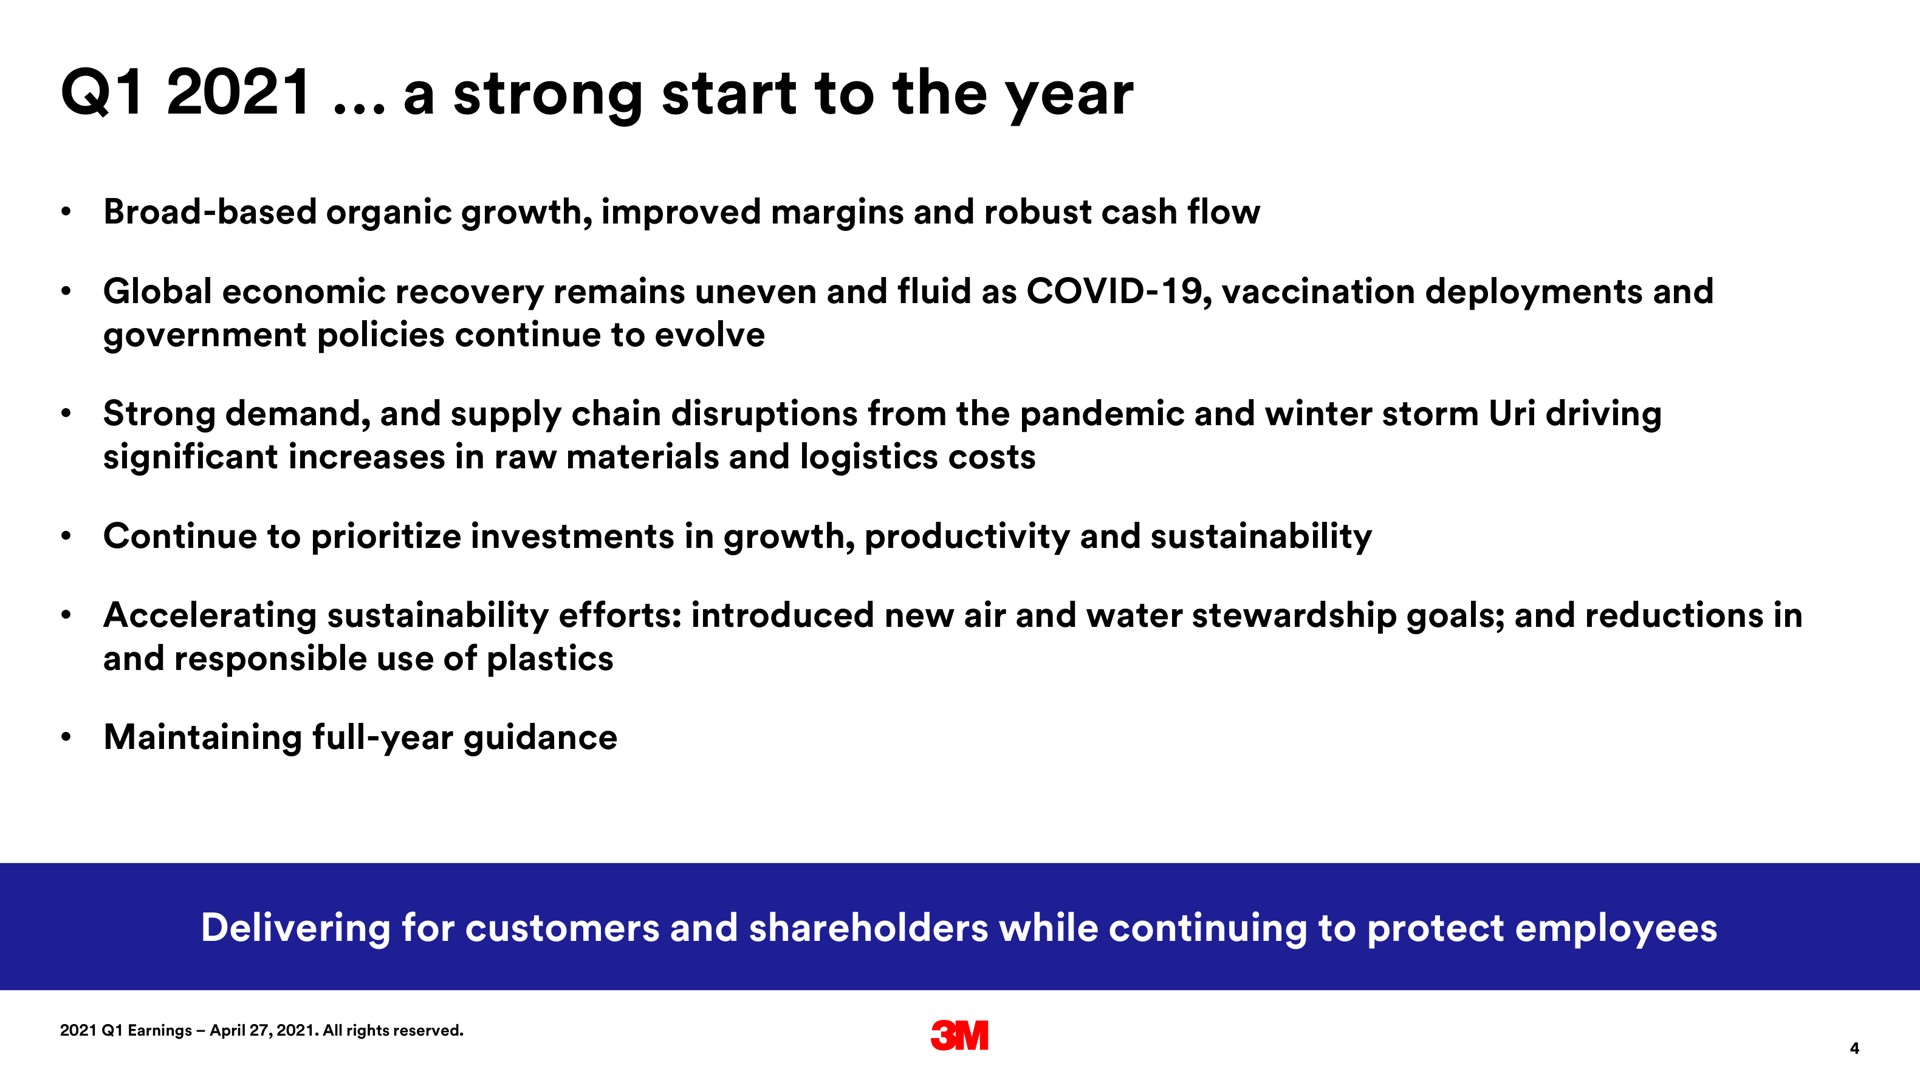 a strong start to the year vision delivering for customers and shareholders while continuing to protect employees | 3M